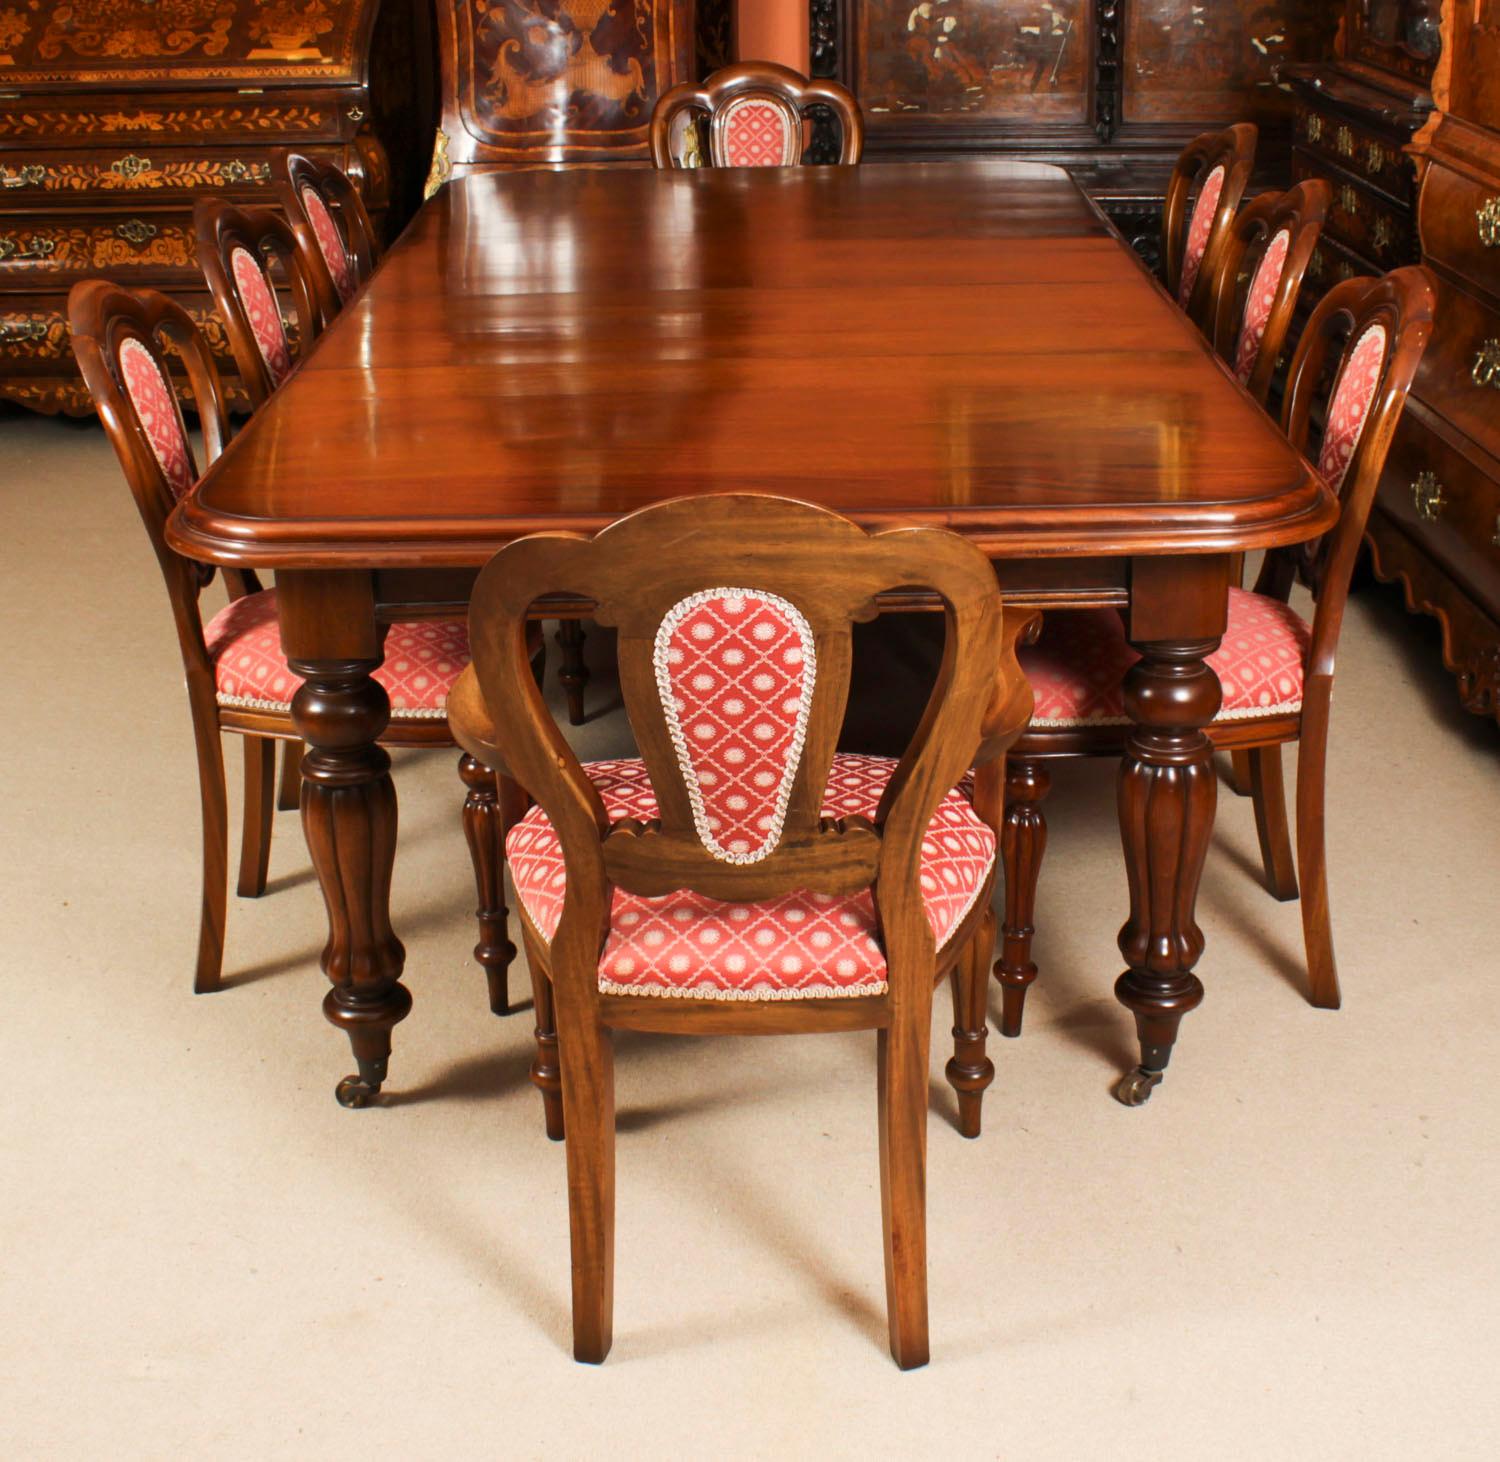 This is a fabulous vintage Victorian Revival mahogany extending dining table and the matching set of eight Admiralty Back dining chairs, dating from the late 20th Century.

The table has two original leaves and can comfortably seat eight. It has